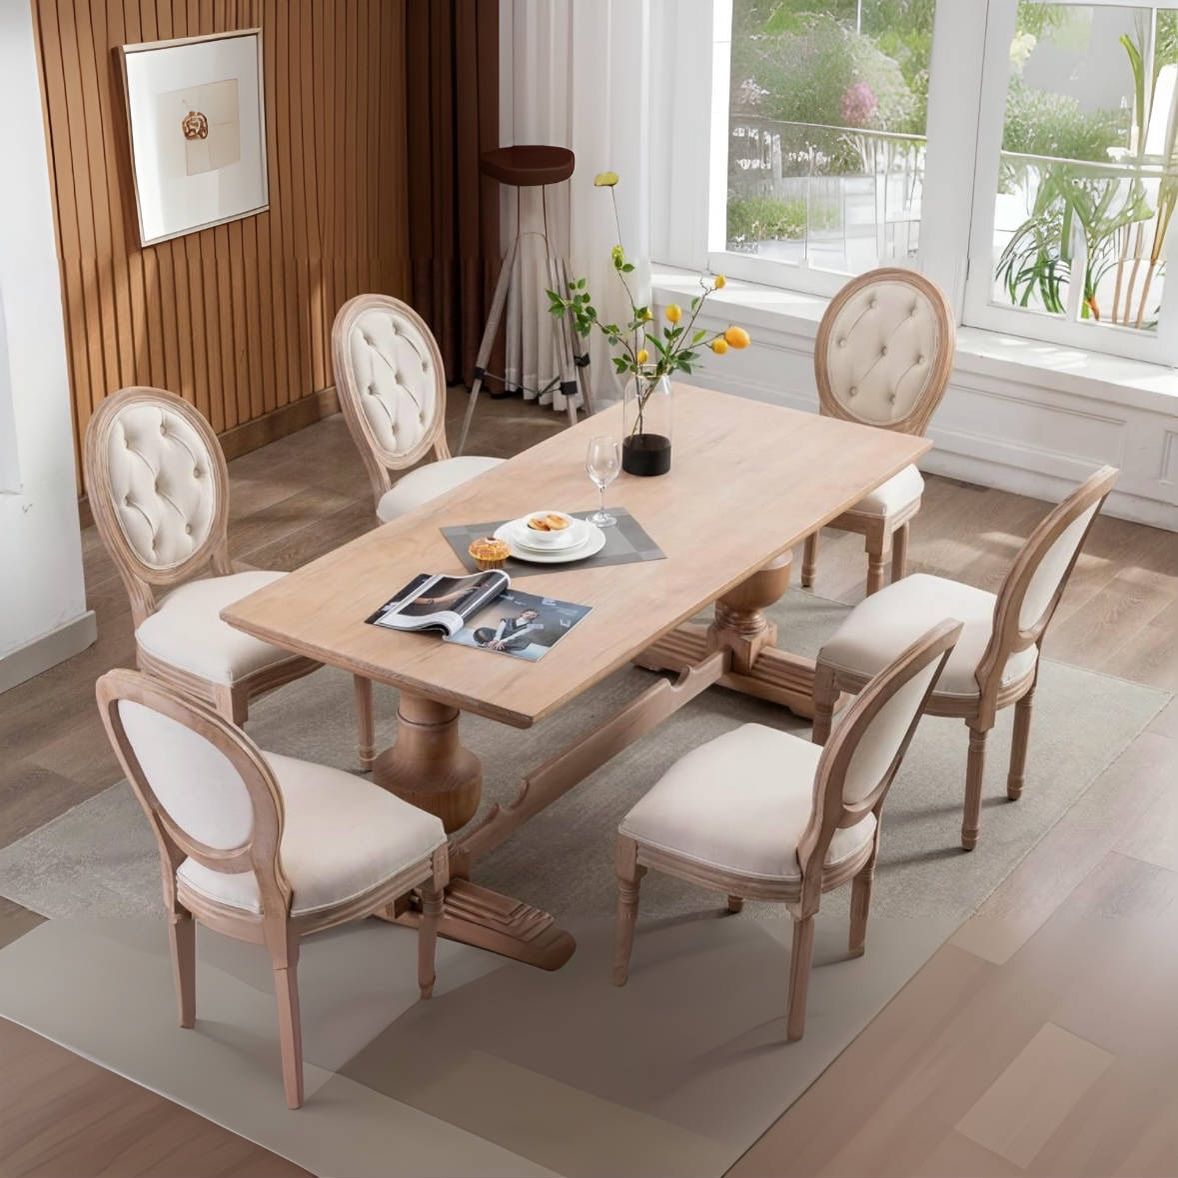 Set Of 6 - Natural Wood Beige Upholstered French Dining Chairs [NEW IN BOX] [CHAIRS ONLY / TABLE NOT INCLUDED] 